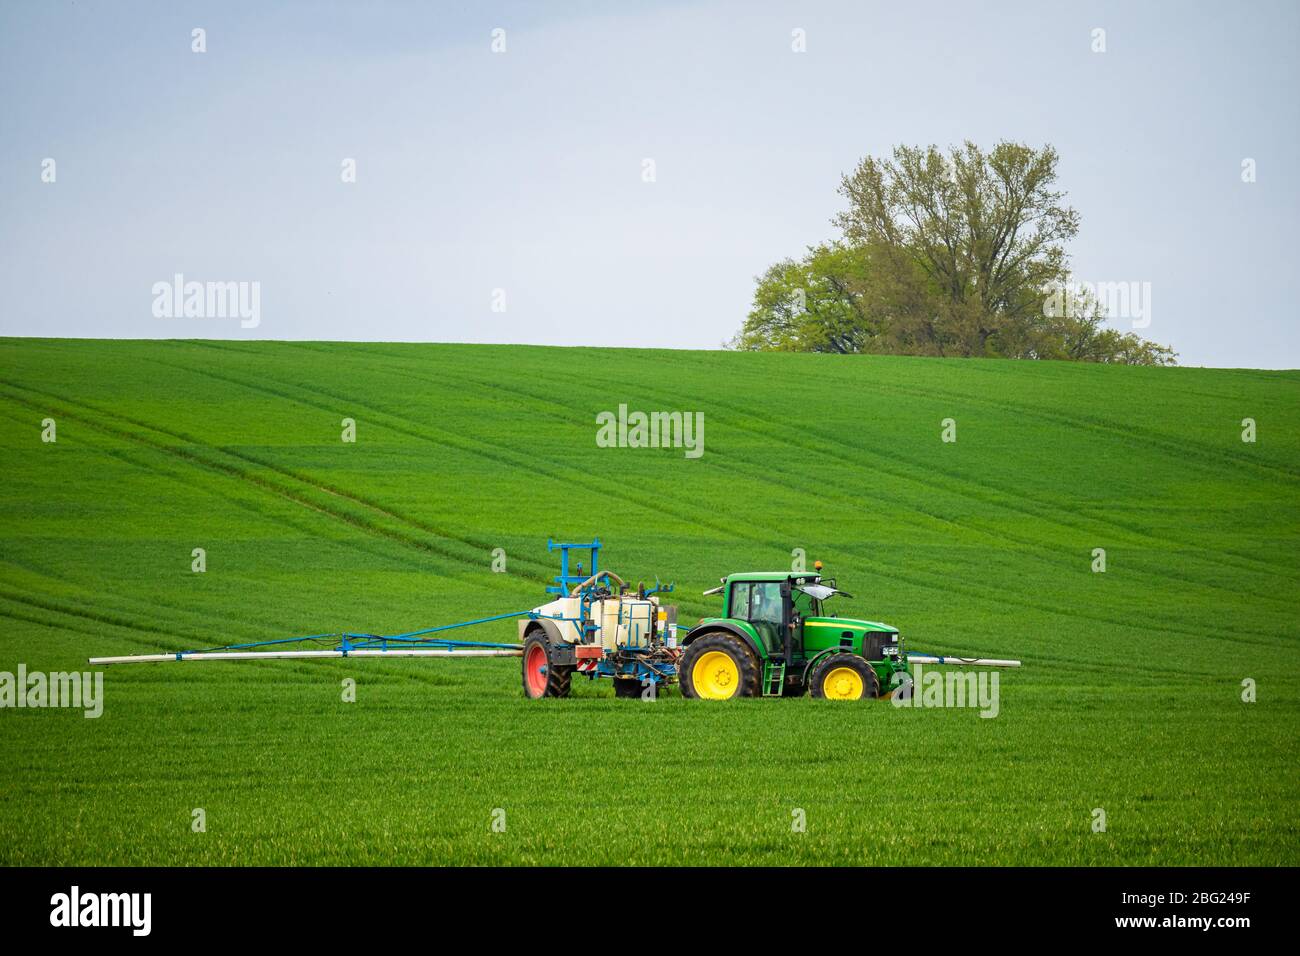 Tractor with trailed sprayer apply herbicides, pesticides or fertilizers on agricultural crops Stock Photo